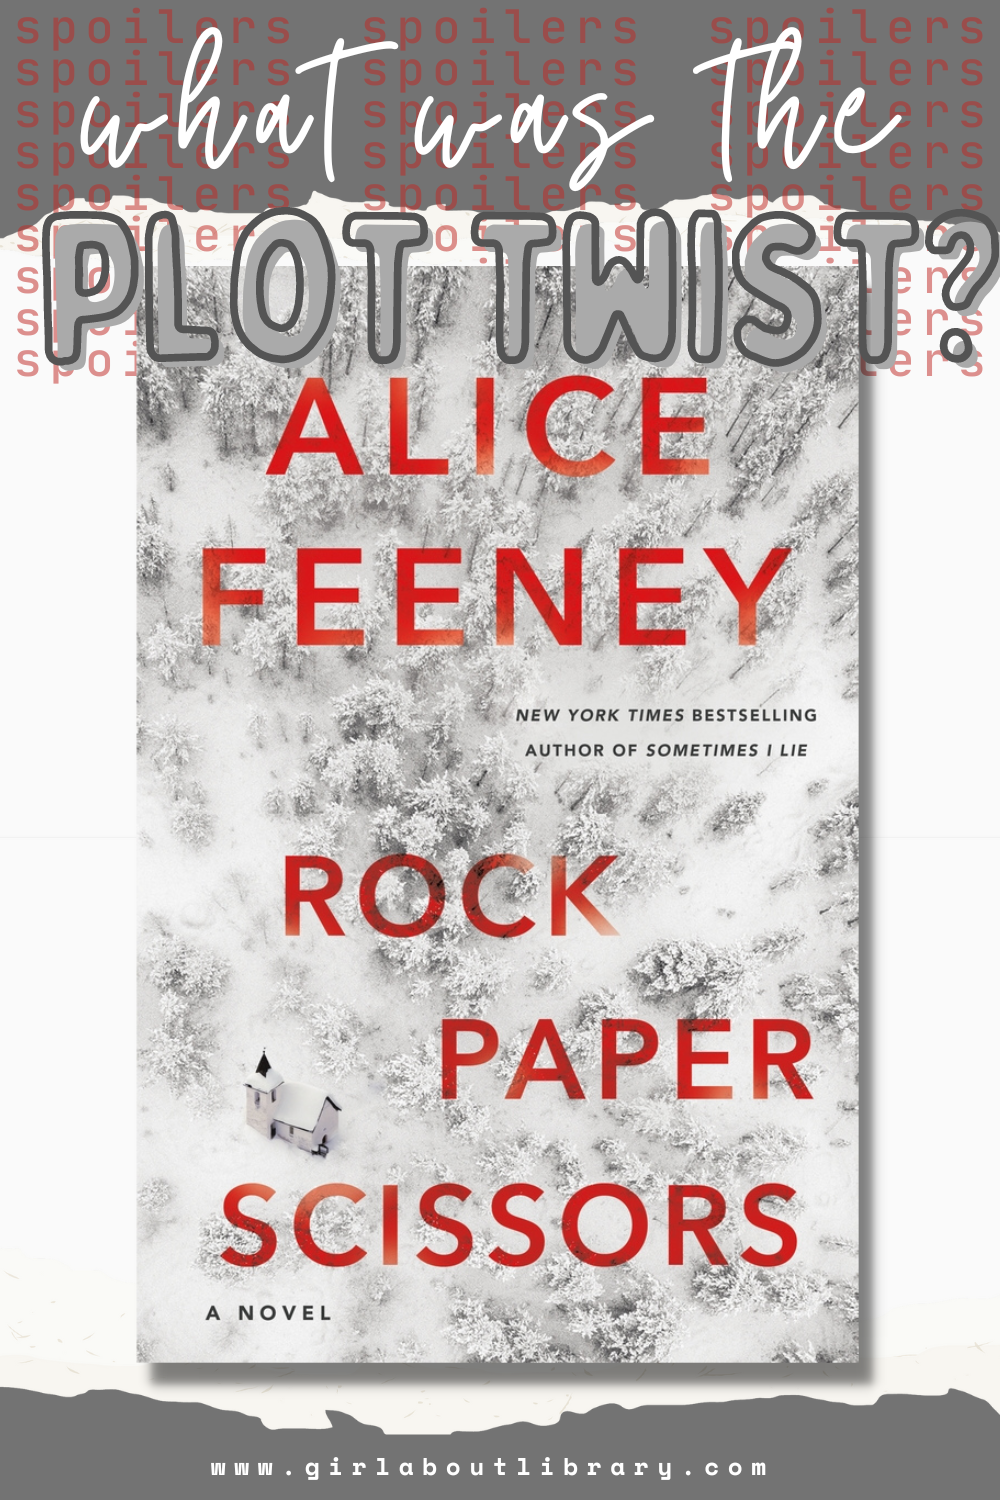 How I Predicted the Twist in “Rock Paper Scissors” From the First Few  Chapters (LOTS O' SPOILERS!) – My Book Joy